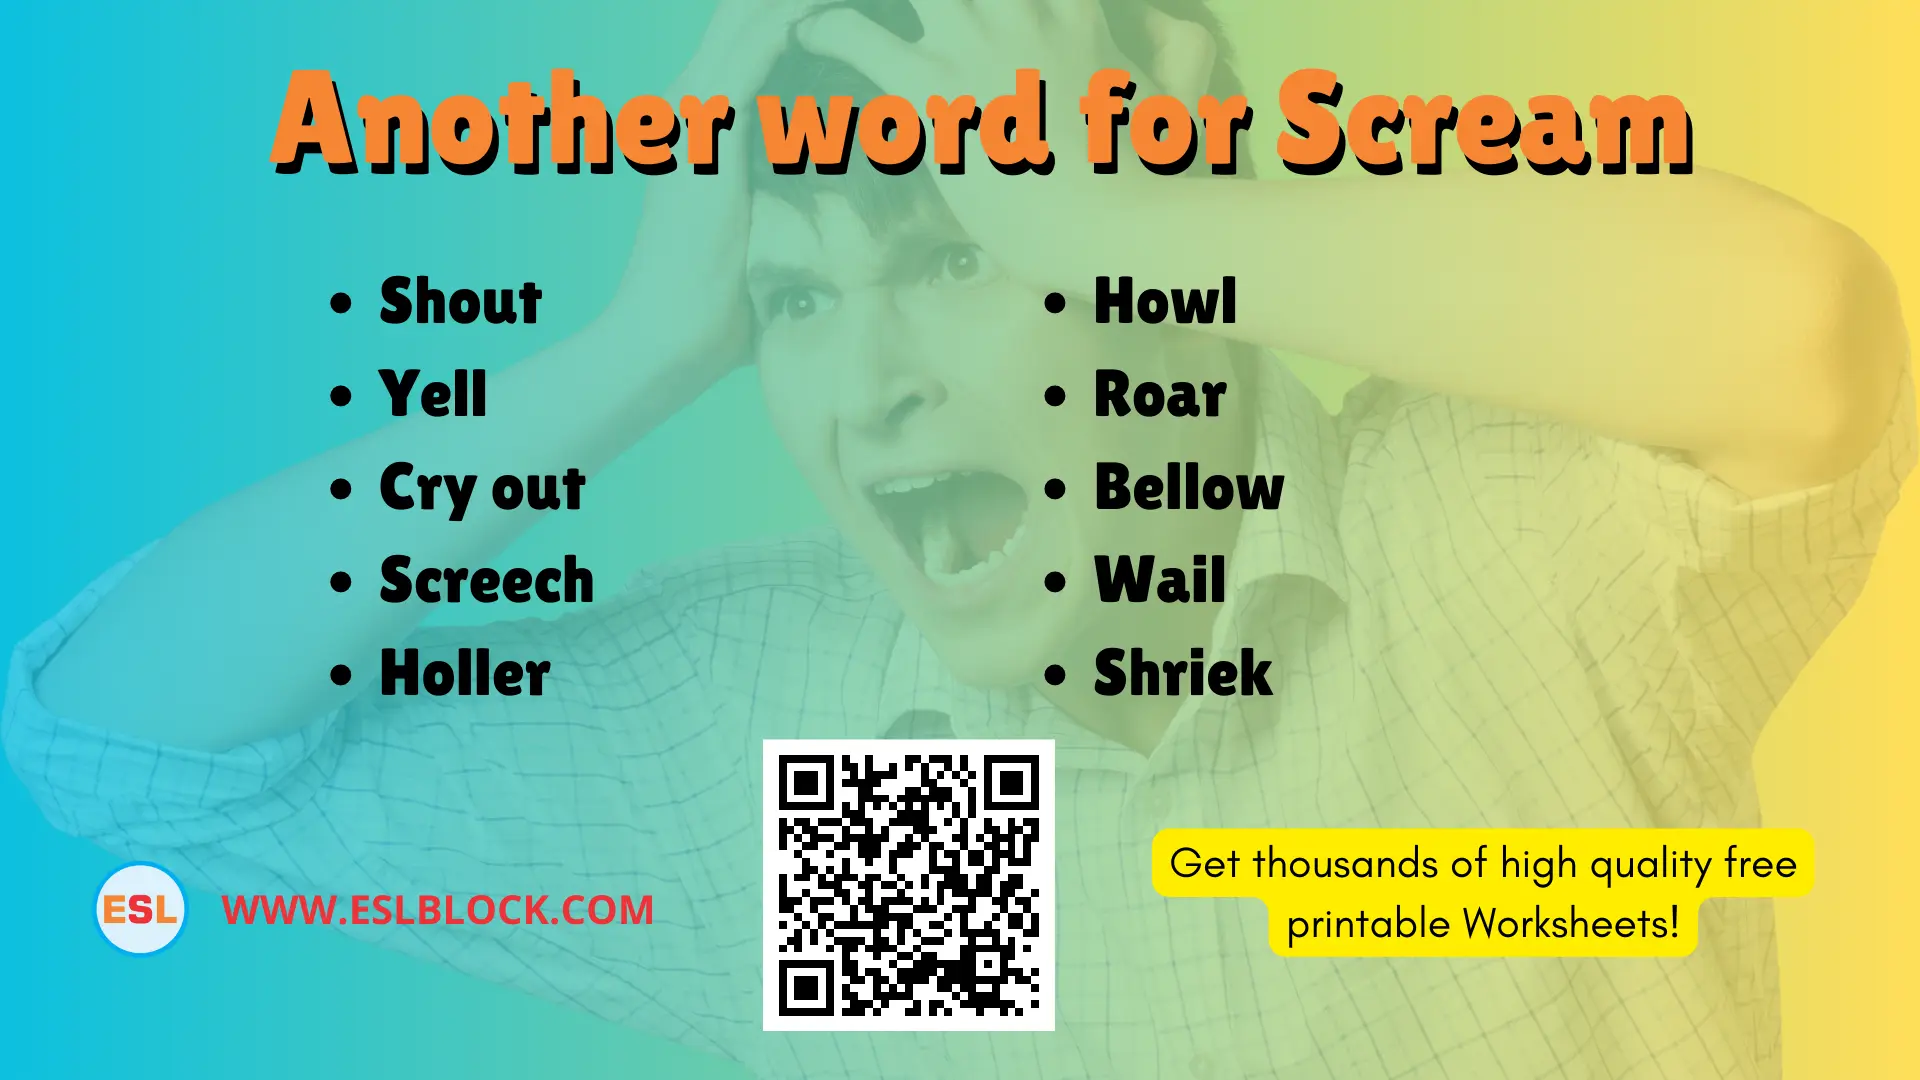 _What is another word for Scream (1)